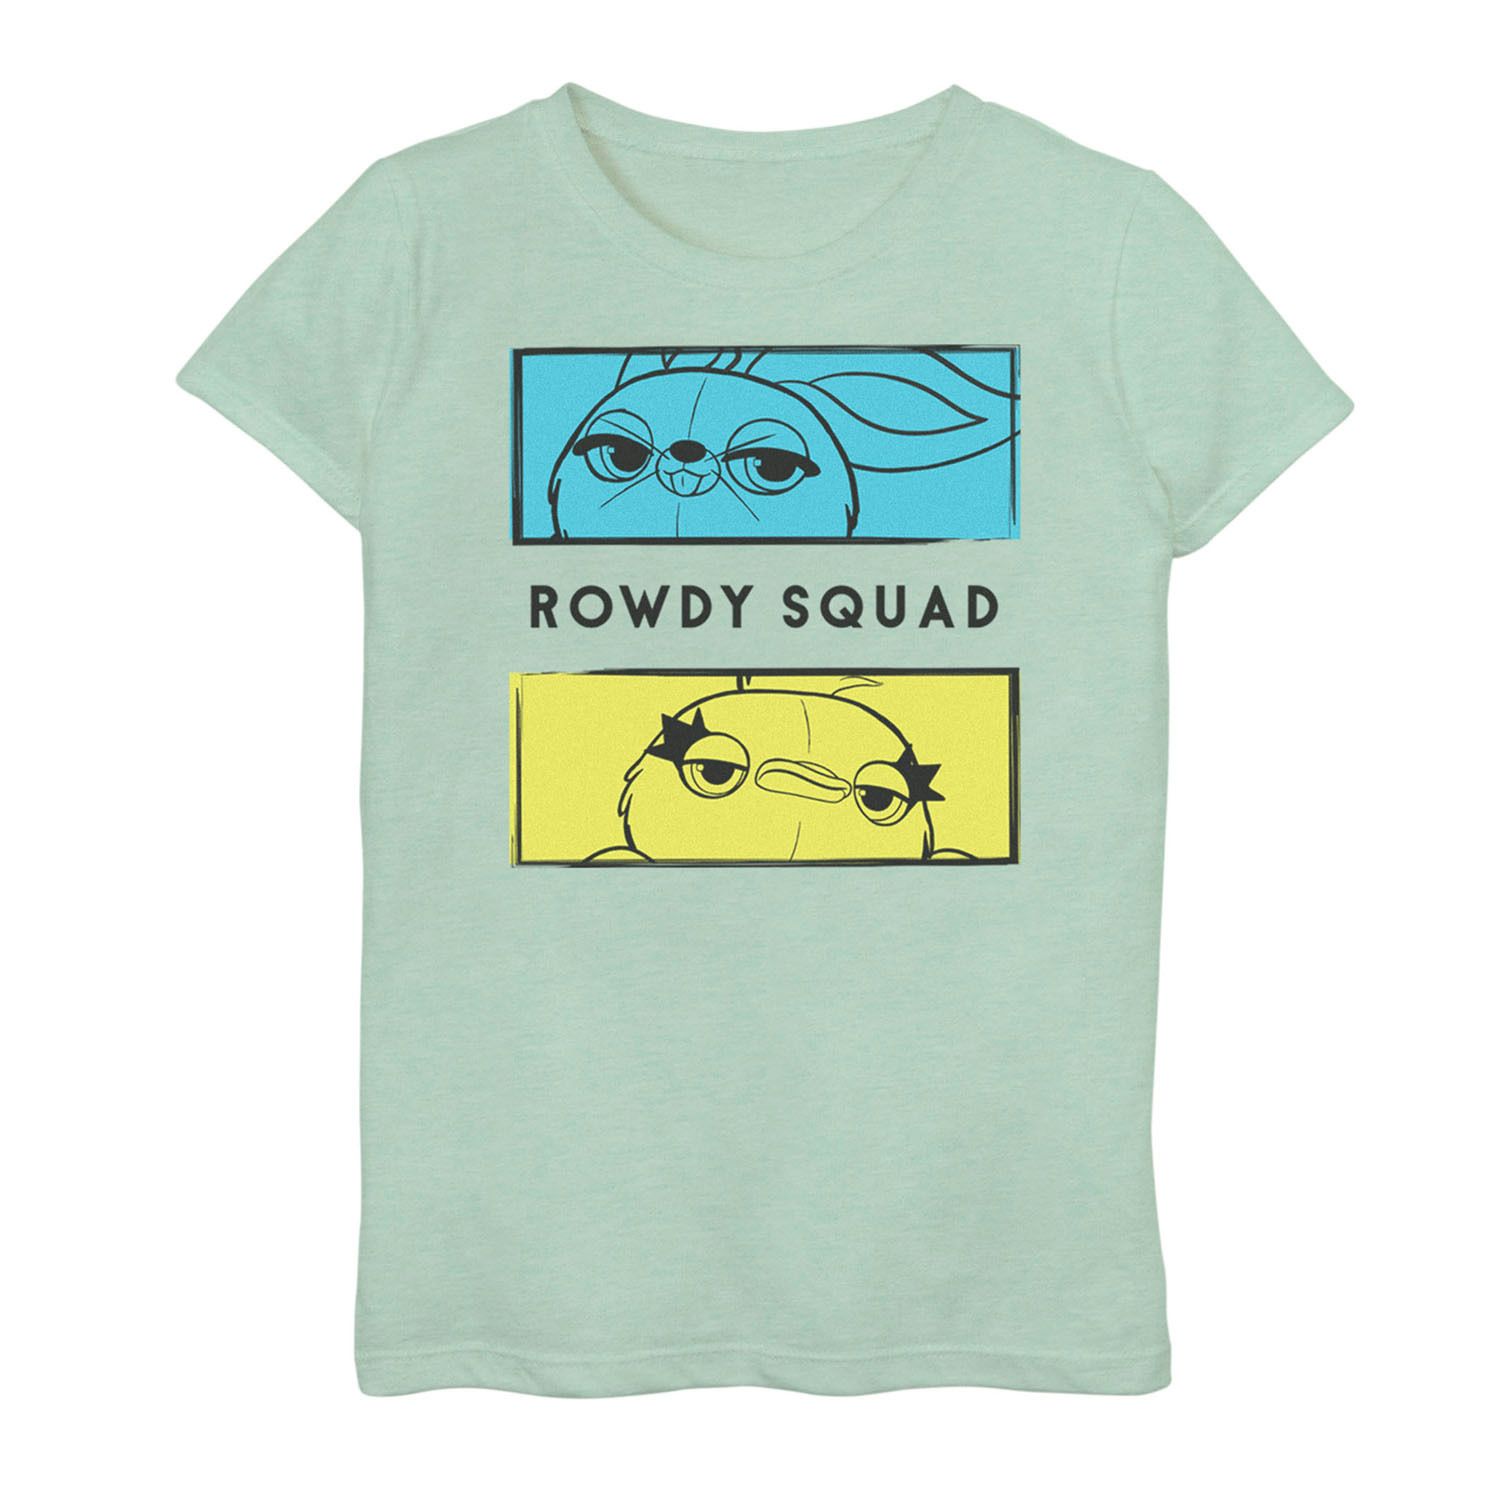 Image for Disney / Pixar Toy Story 4 Girls 7-16 Ducky & Bunny "Rowdy Squad" Graphic Tee at Kohl's.